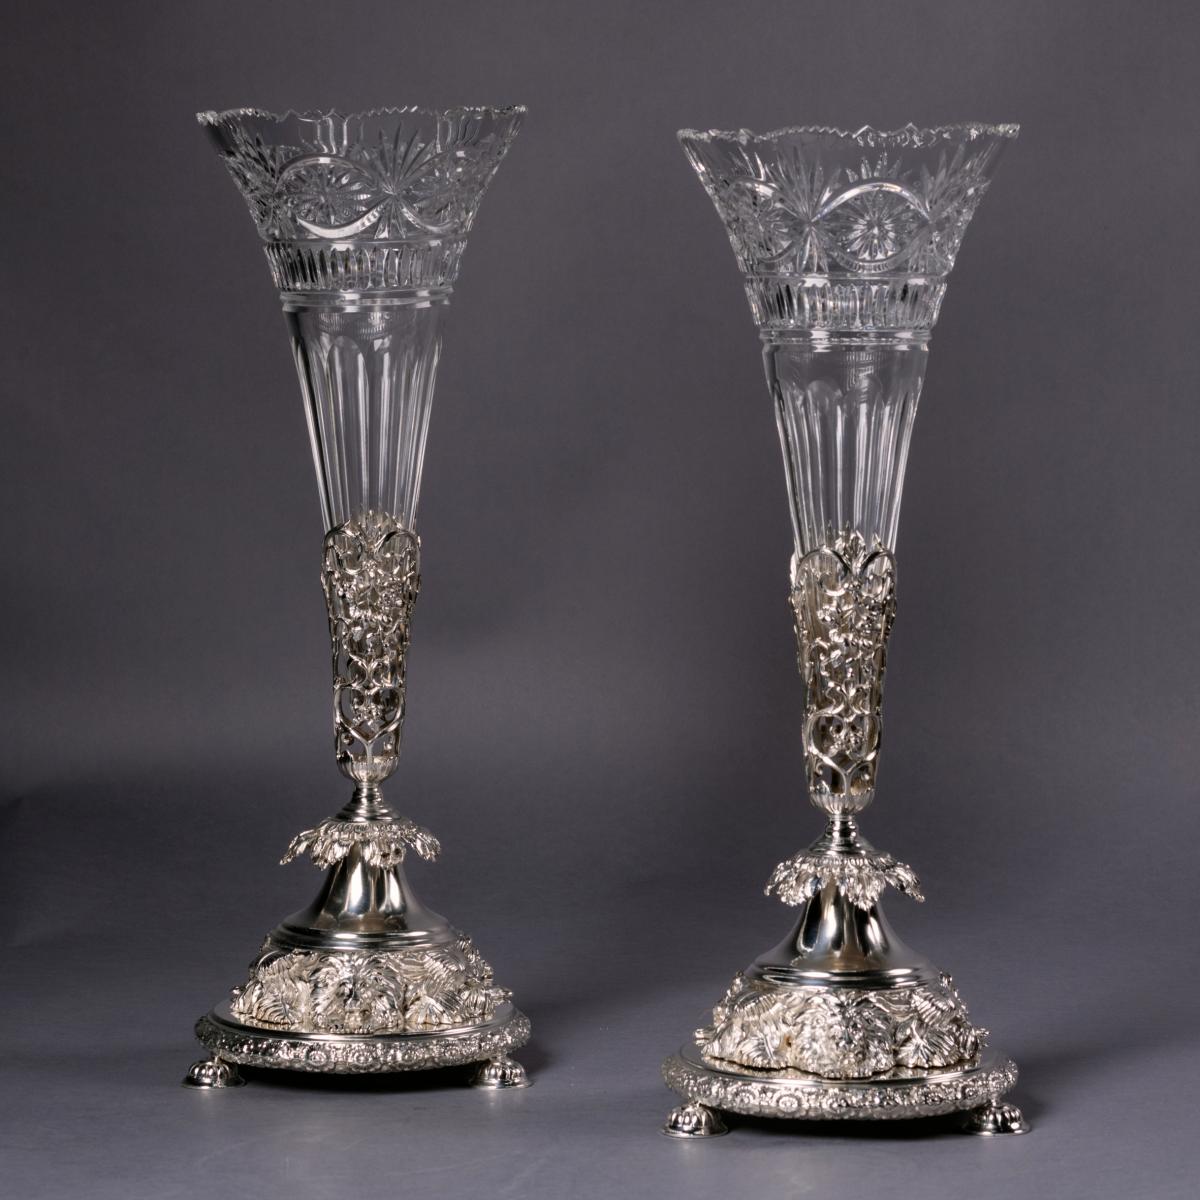  Pair of Victorian Silver-Plated Cut-Glass Vases, By Joseph Rodgers & Sons 